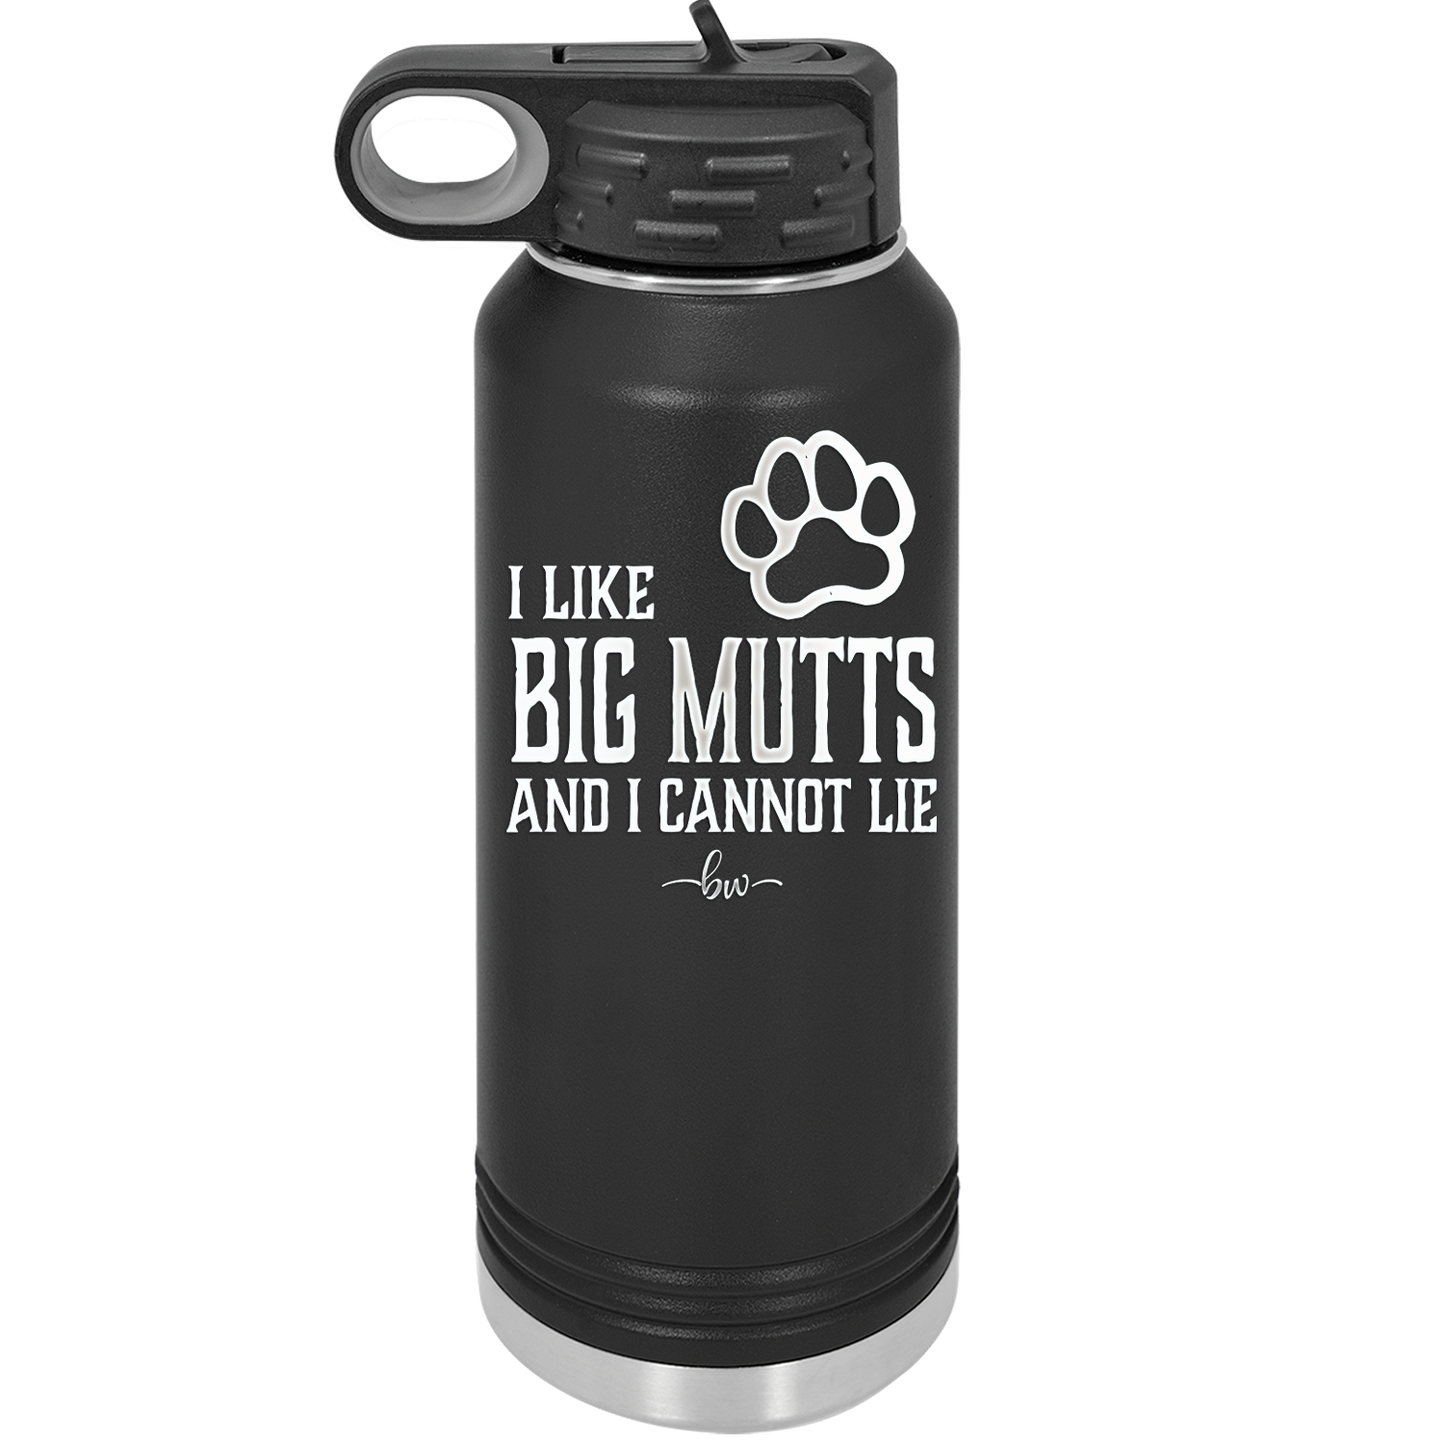 I Like Big Mutts and I Cannot Lie - Laser Engraved Stainless Steel Drinkware - 1025 -